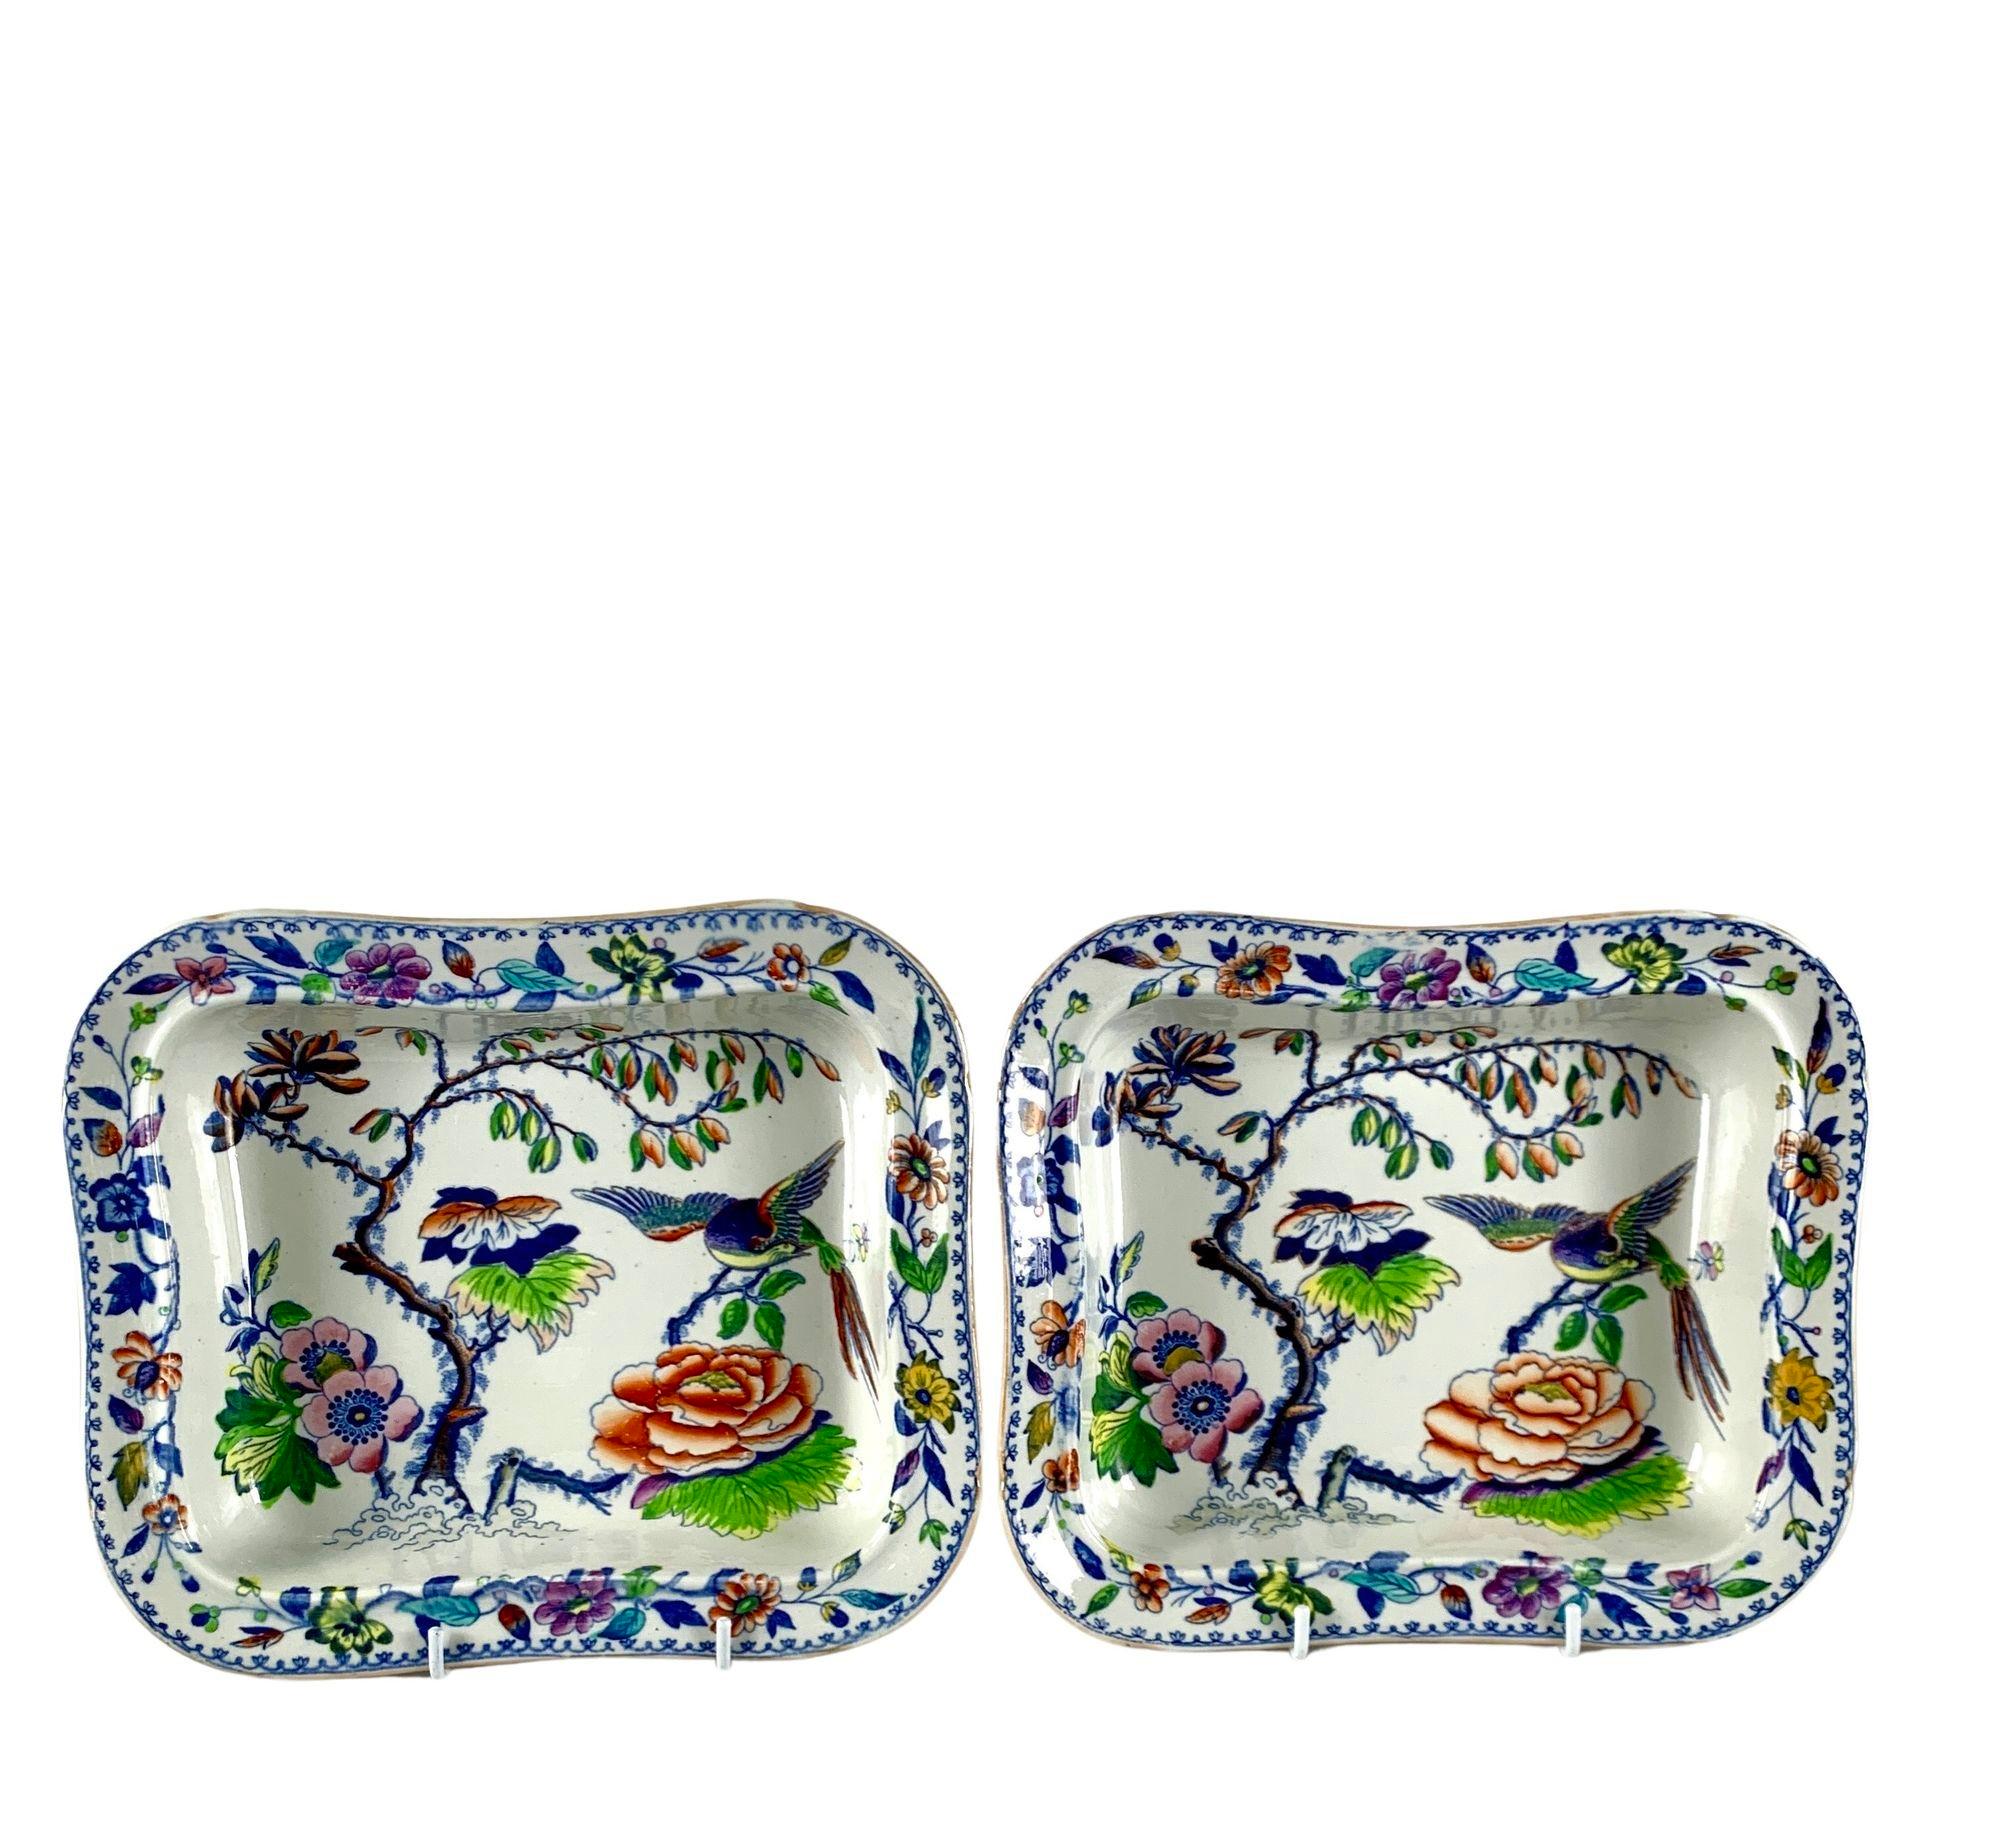 This pair of dishes in the gorgeous Flying Bird pattern was made by Davenport in England circa 1840.
The Davenport Flying Bird pattern has been much sought after since it was first made in England in 1813.
This lively and colorful pattern features